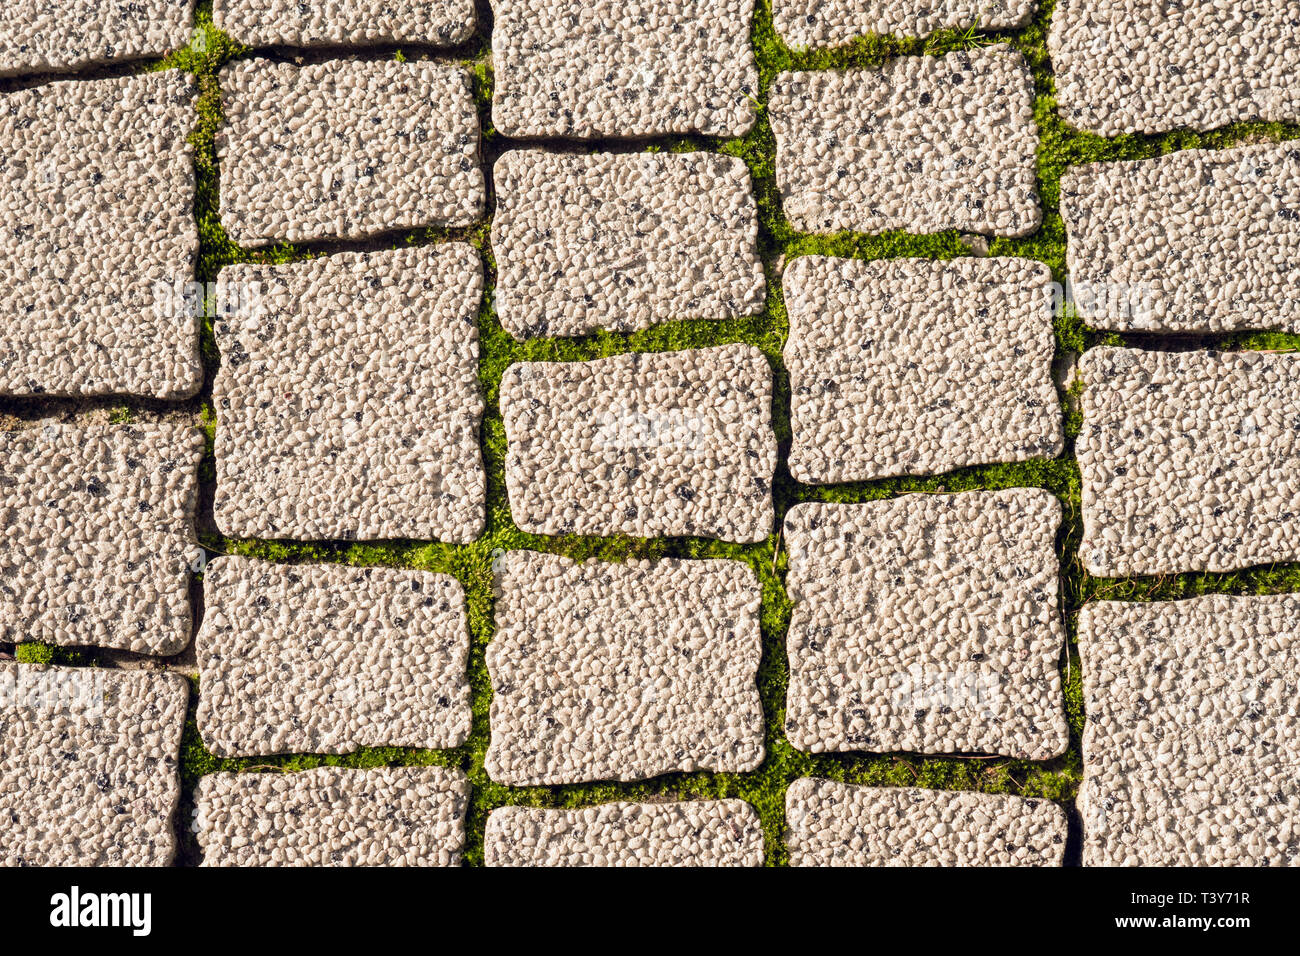 cobblestone street surface with weeds growing in joints Stock Photo